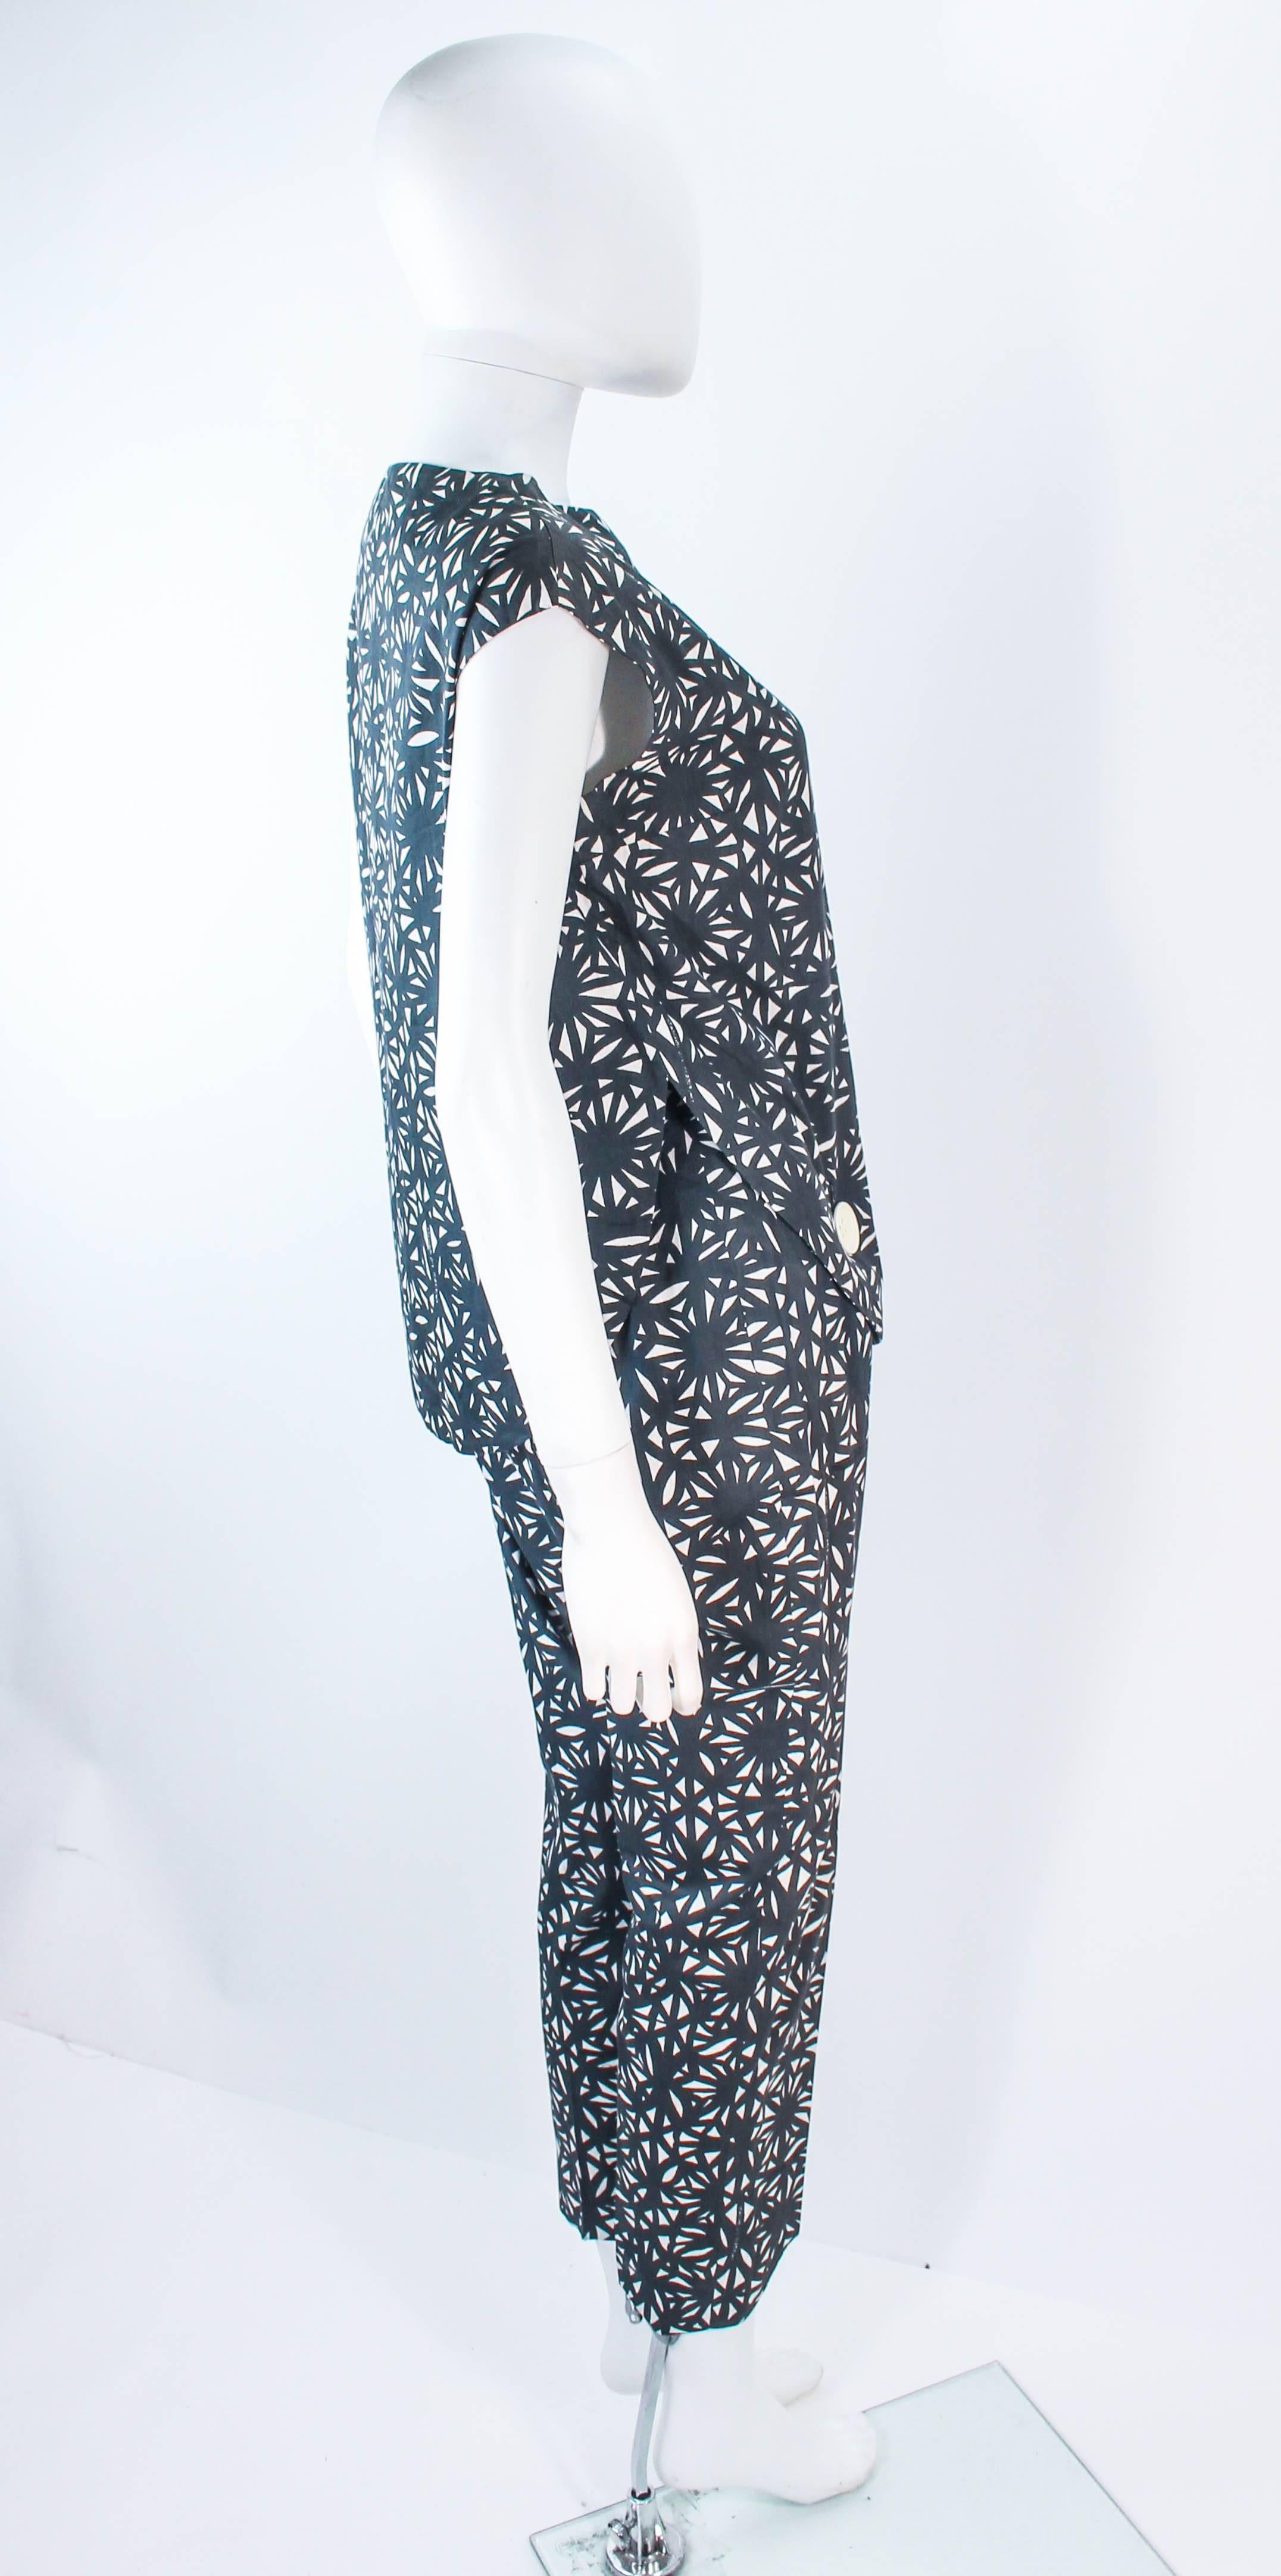 GIANNI BALDINI Vintage Printed Cotton Pants and Top Ensemble Size 4  In Excellent Condition For Sale In Los Angeles, CA